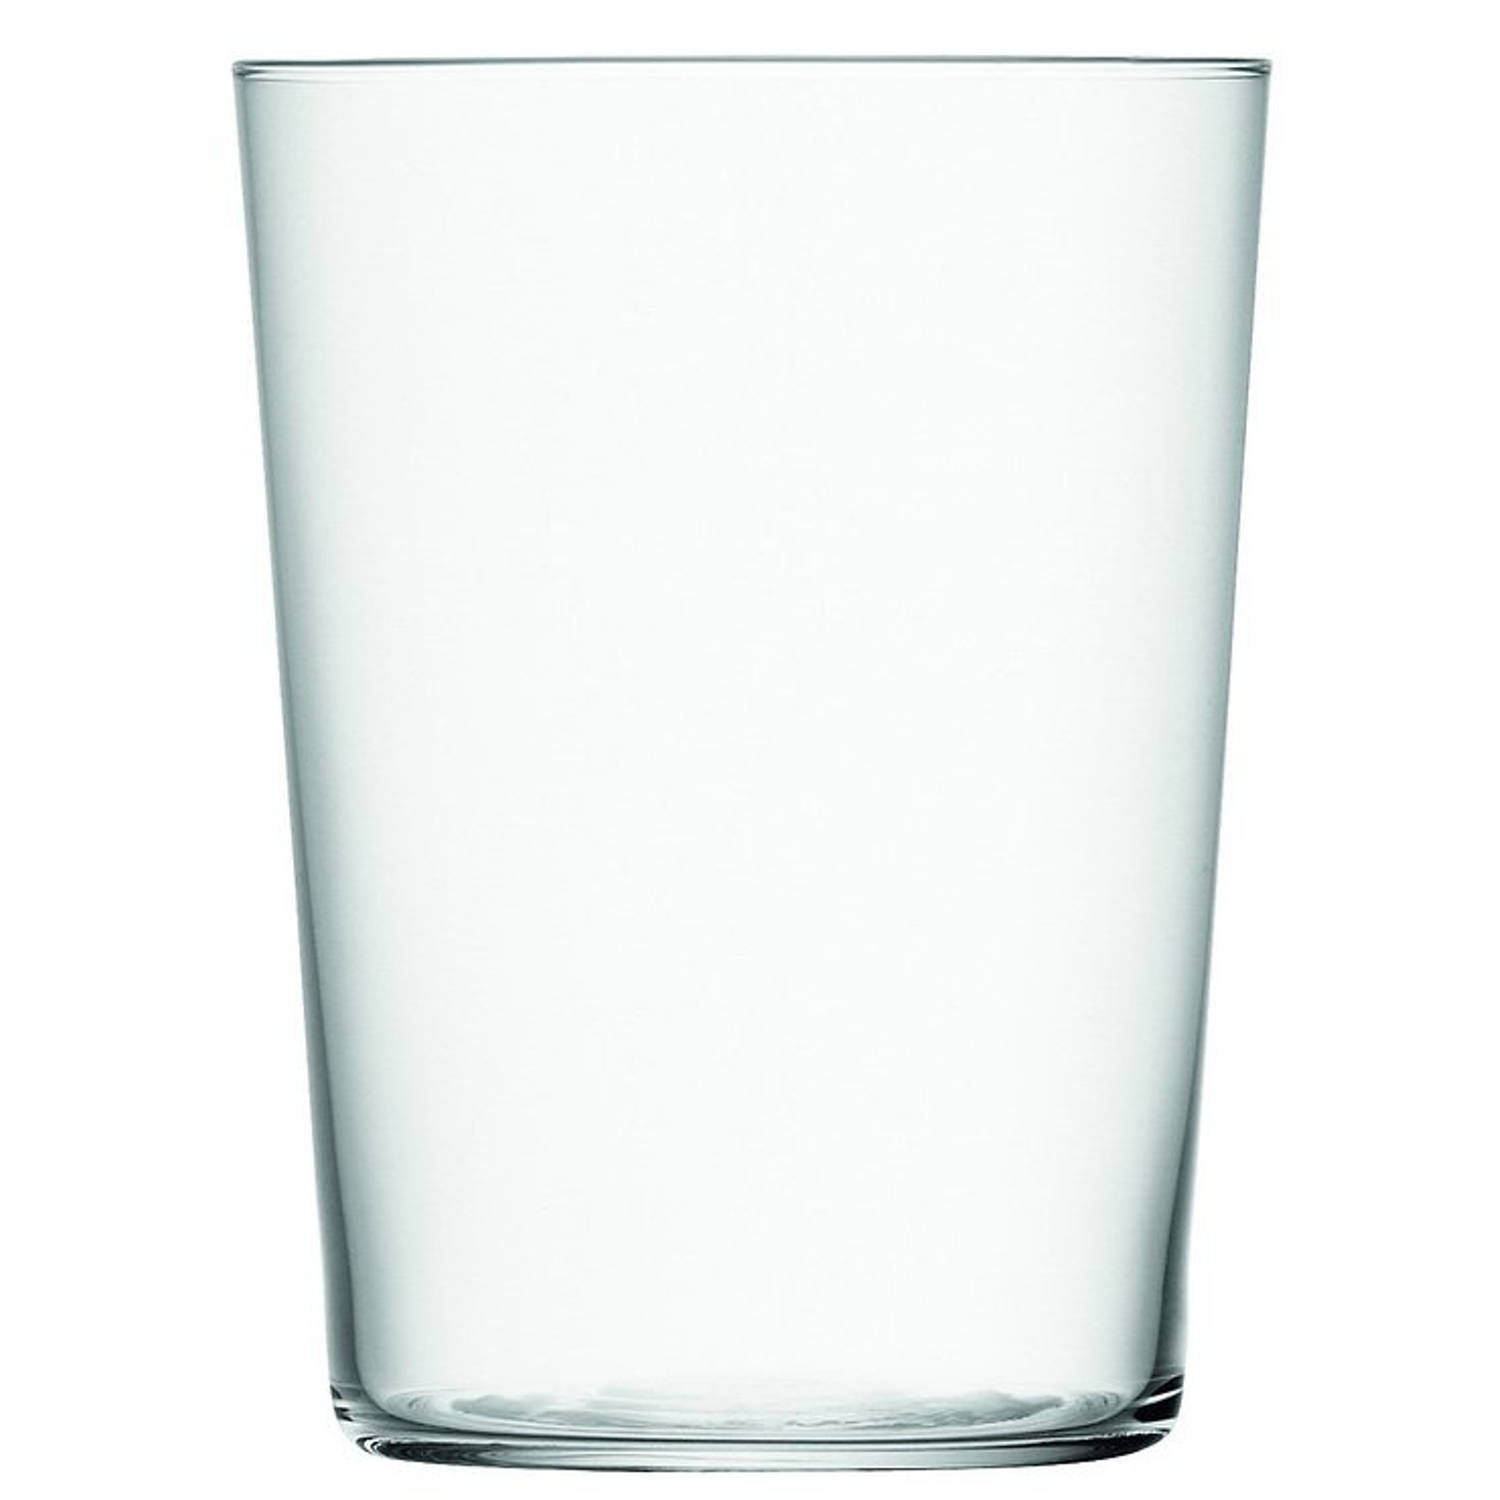 L.S.A. - Gio Waterglas Groot 560 ml - Transparant